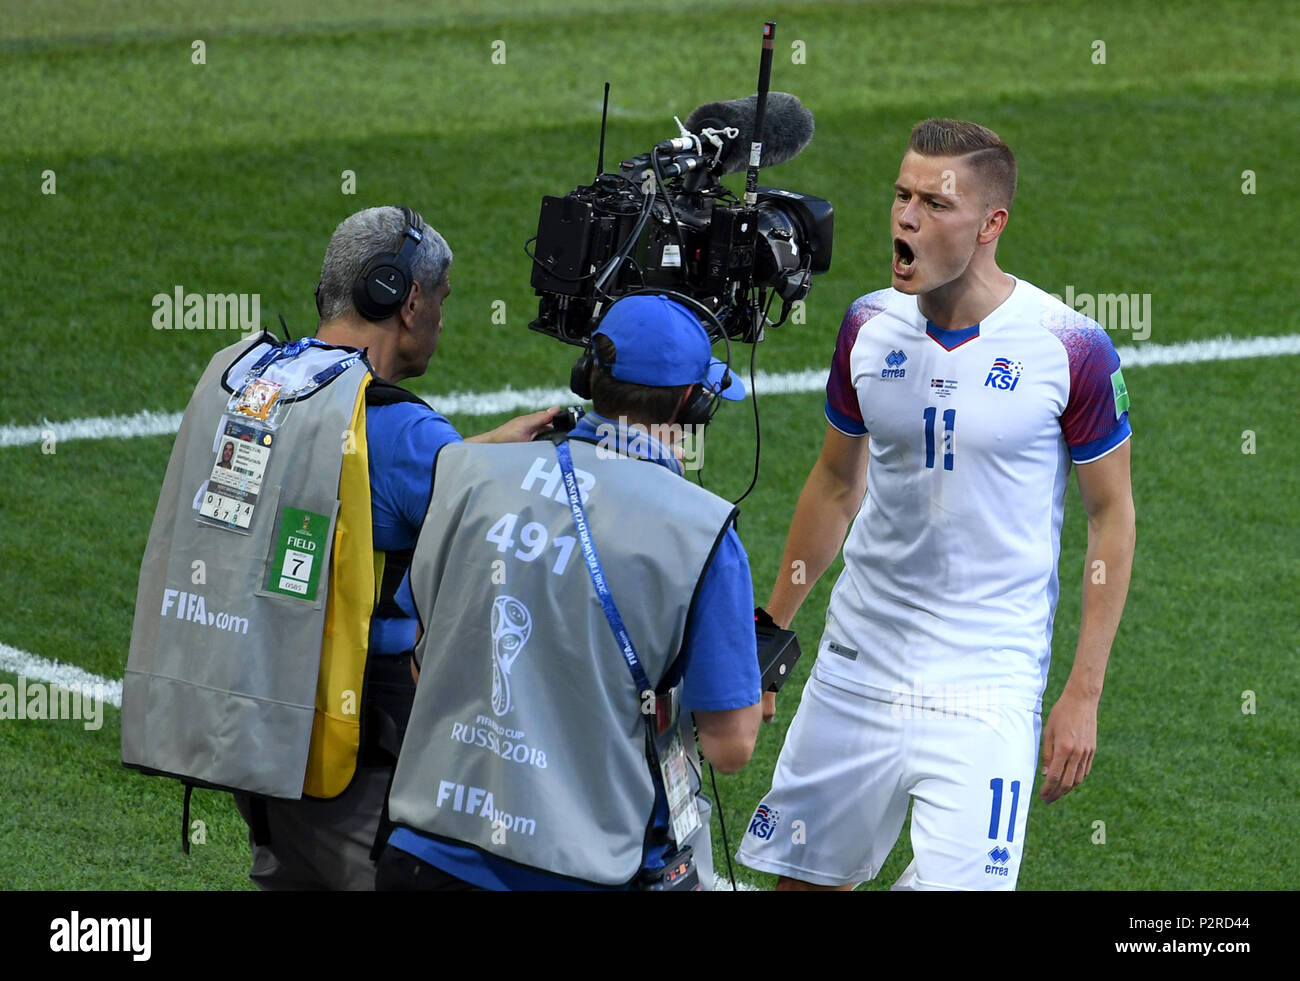 Moscow, Russia. 16th June, 2018. Alfred Finnbogason of Iceland celebrates scoring during a group D match between Argentina and Iceland at the 2018 FIFA World Cup in Moscow, Russia, June 16, 2018. Credit: Wang Yuguo/Xinhua/Alamy Live News Stock Photo